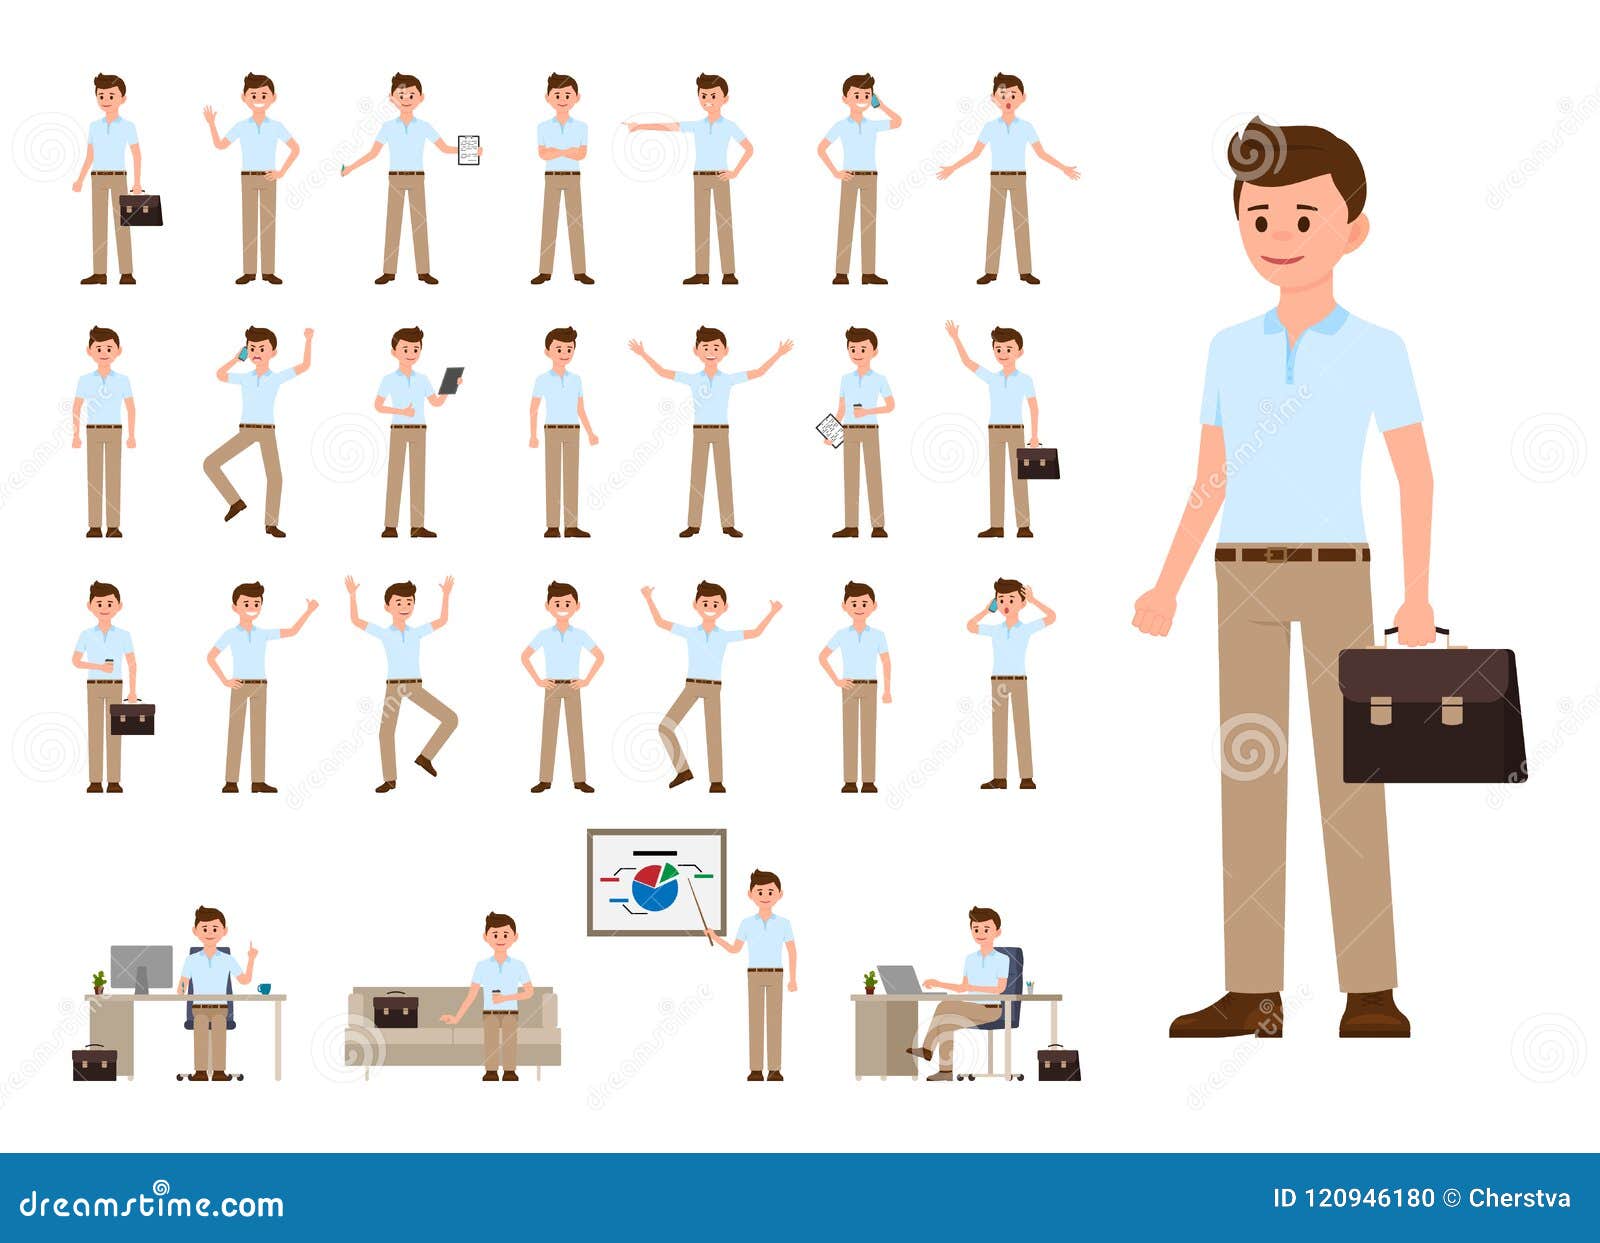 business man in casual office look cartoon character set.   of office person in different poses.